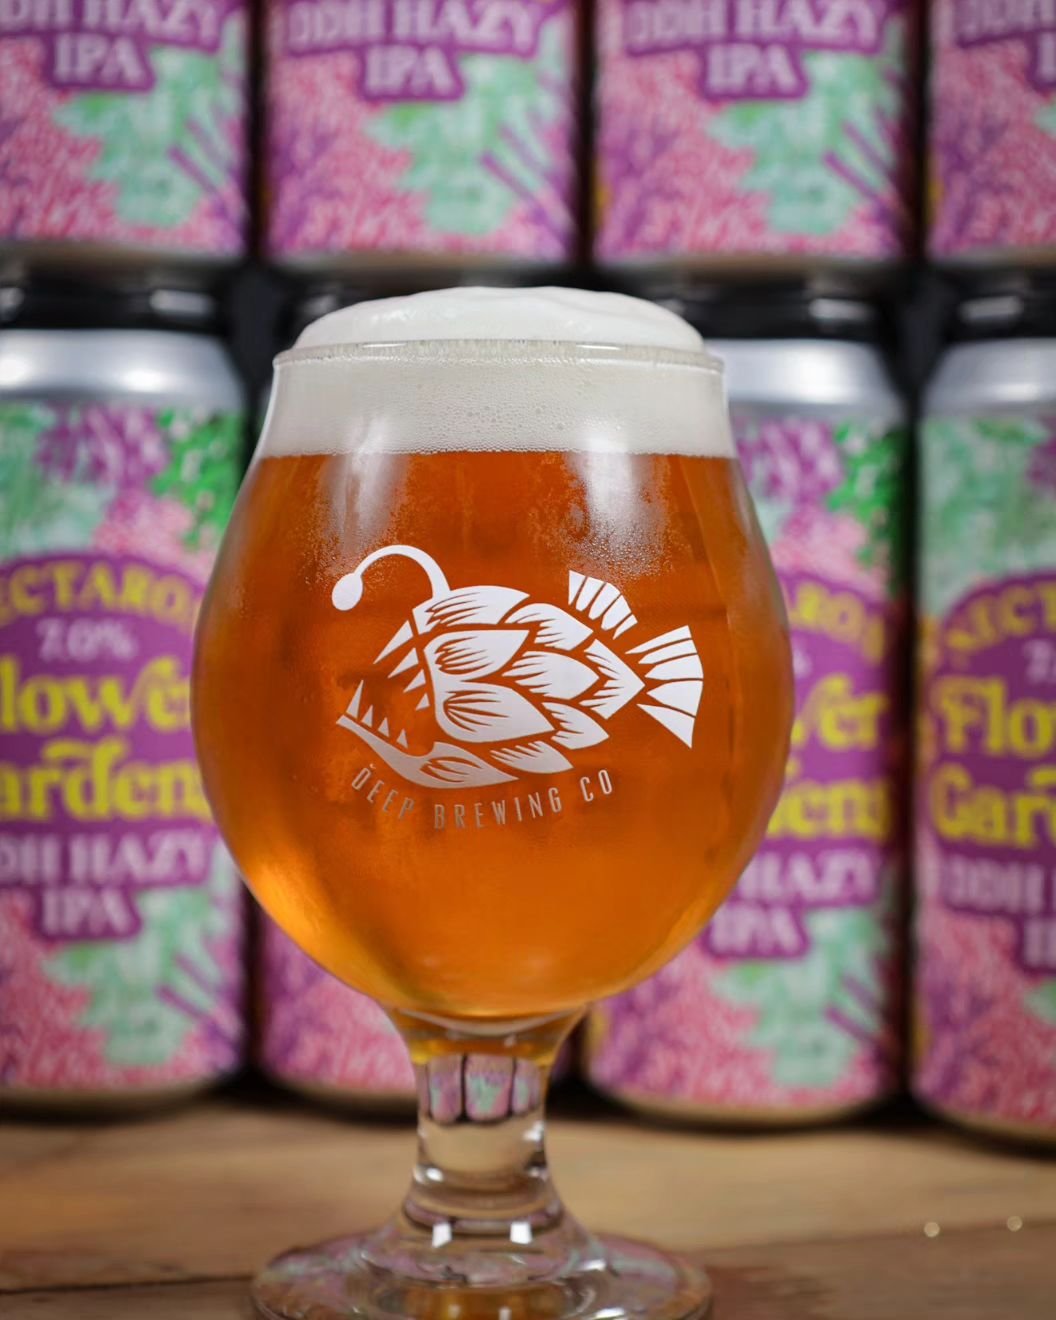 It's #SundayFunday at Deep!

New release NECTARON FLOWER GARDENS Hazy IPA is flowing.

@siriously_thai is here 3-7 pm.

And we've got those 🔥 new Deeo koozies in stock.

You simply couldn't ask for better weather than what we have today. Hopefully, 